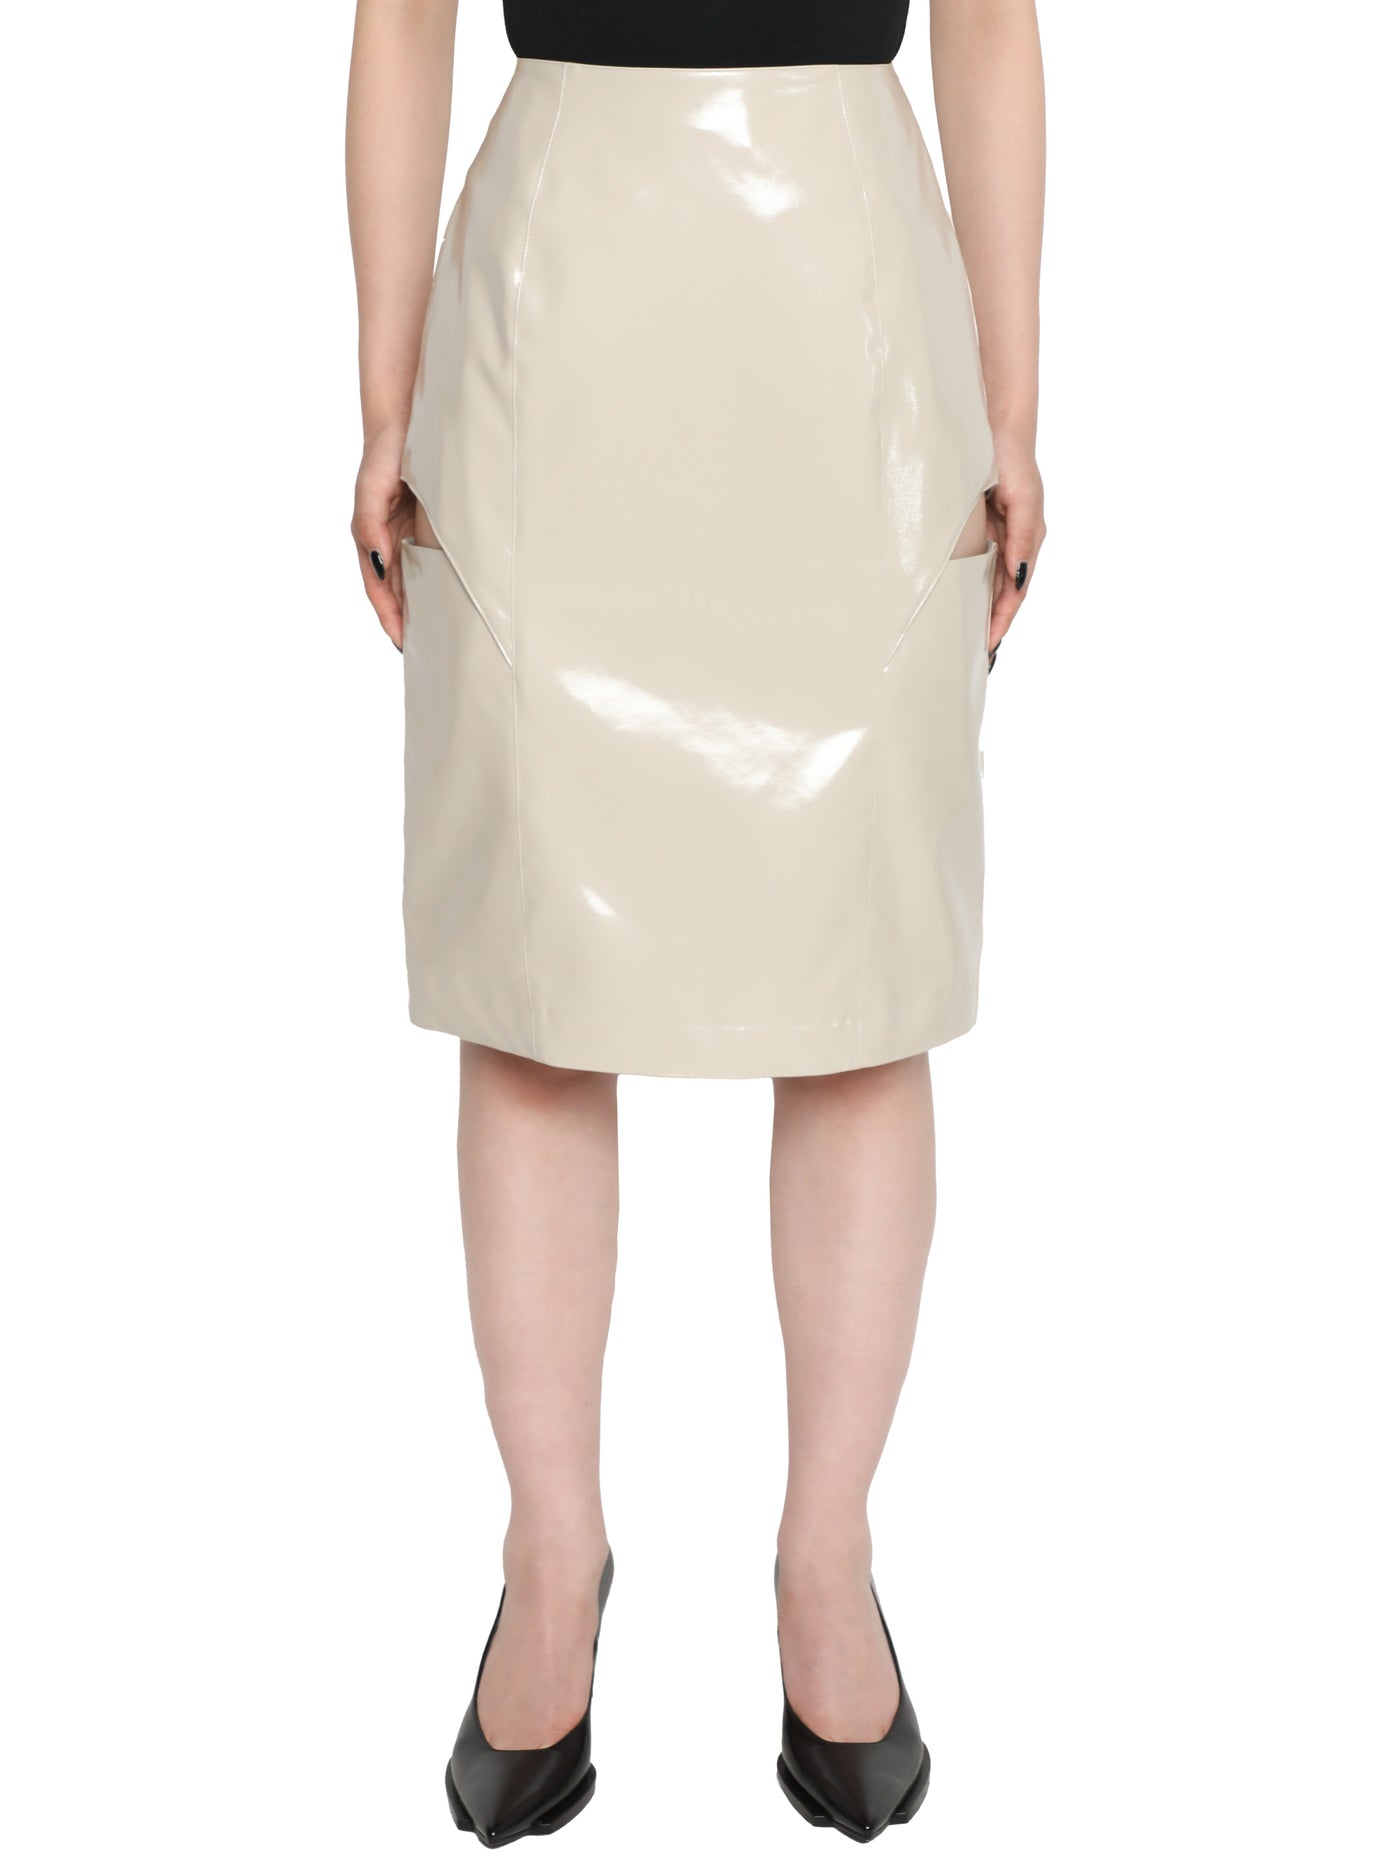 Patent hollowed out skirt